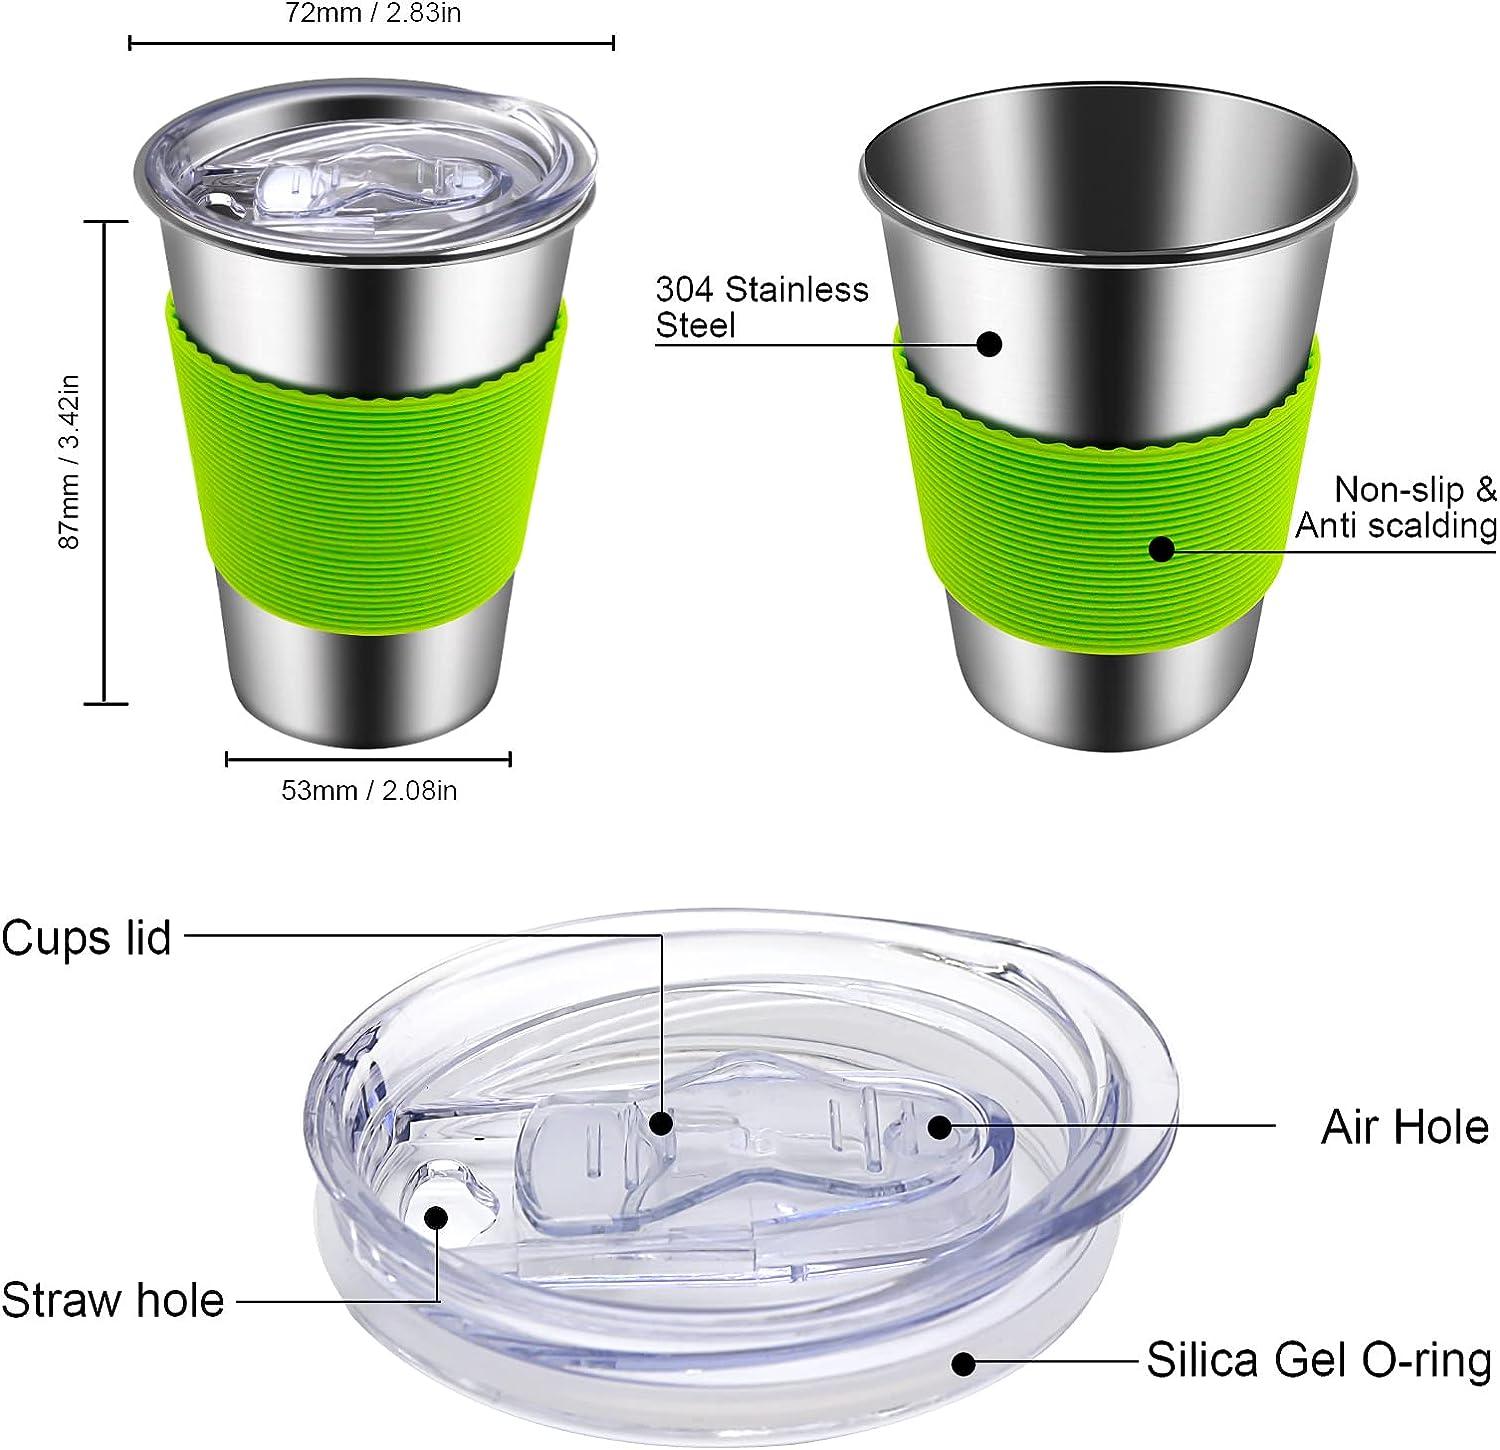 Non-Plastic Children's Stainless Steel Cup